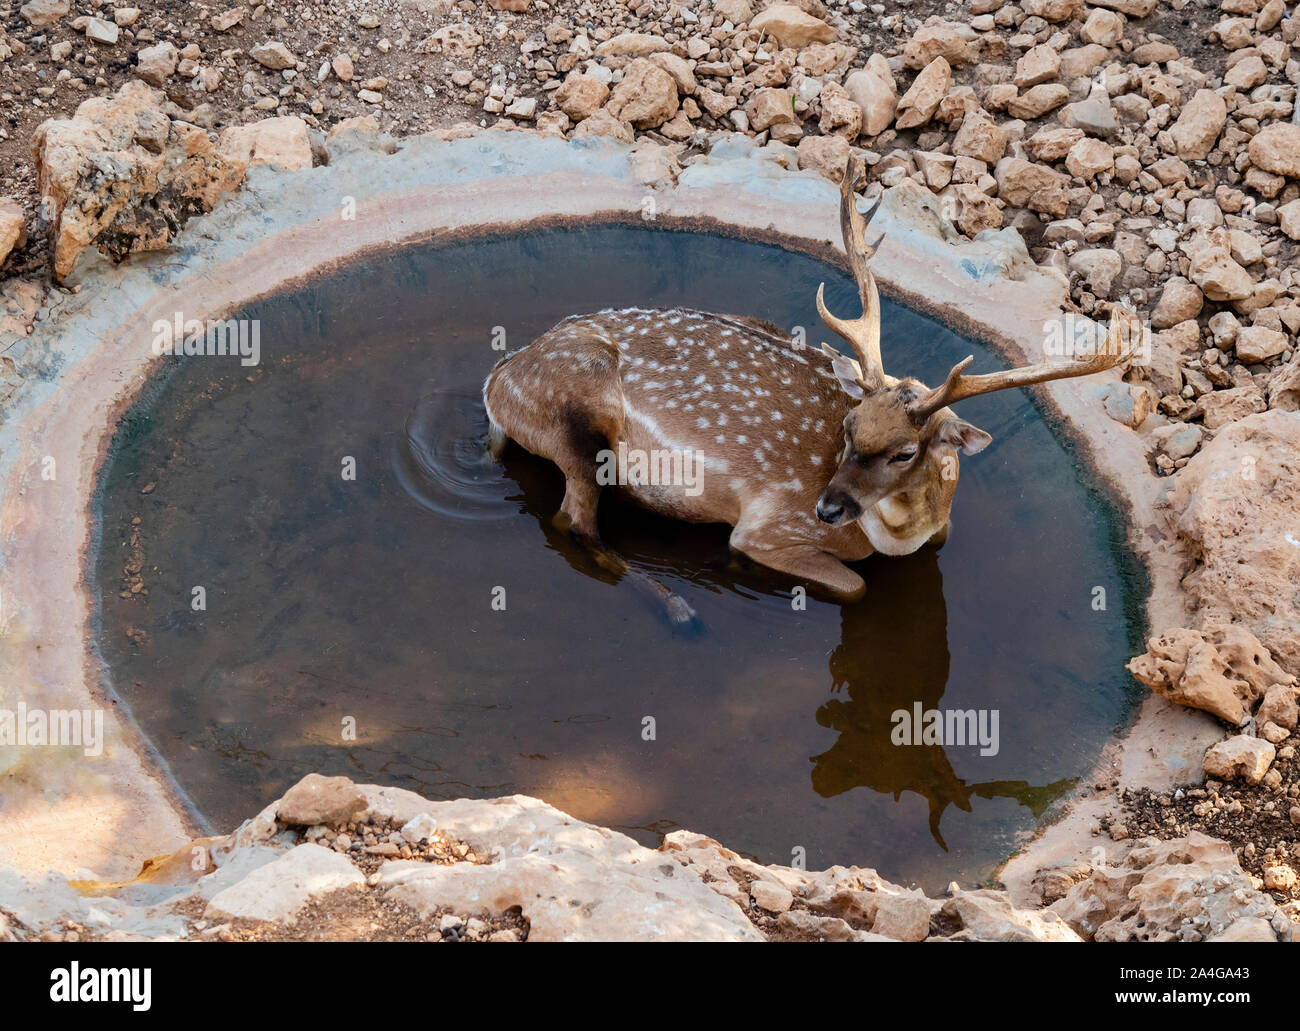 A fallow deer finds relief for the heat of the summer, by soaking in a pool of cool water, at the Jerusale, Israel, zoo Stock Photo